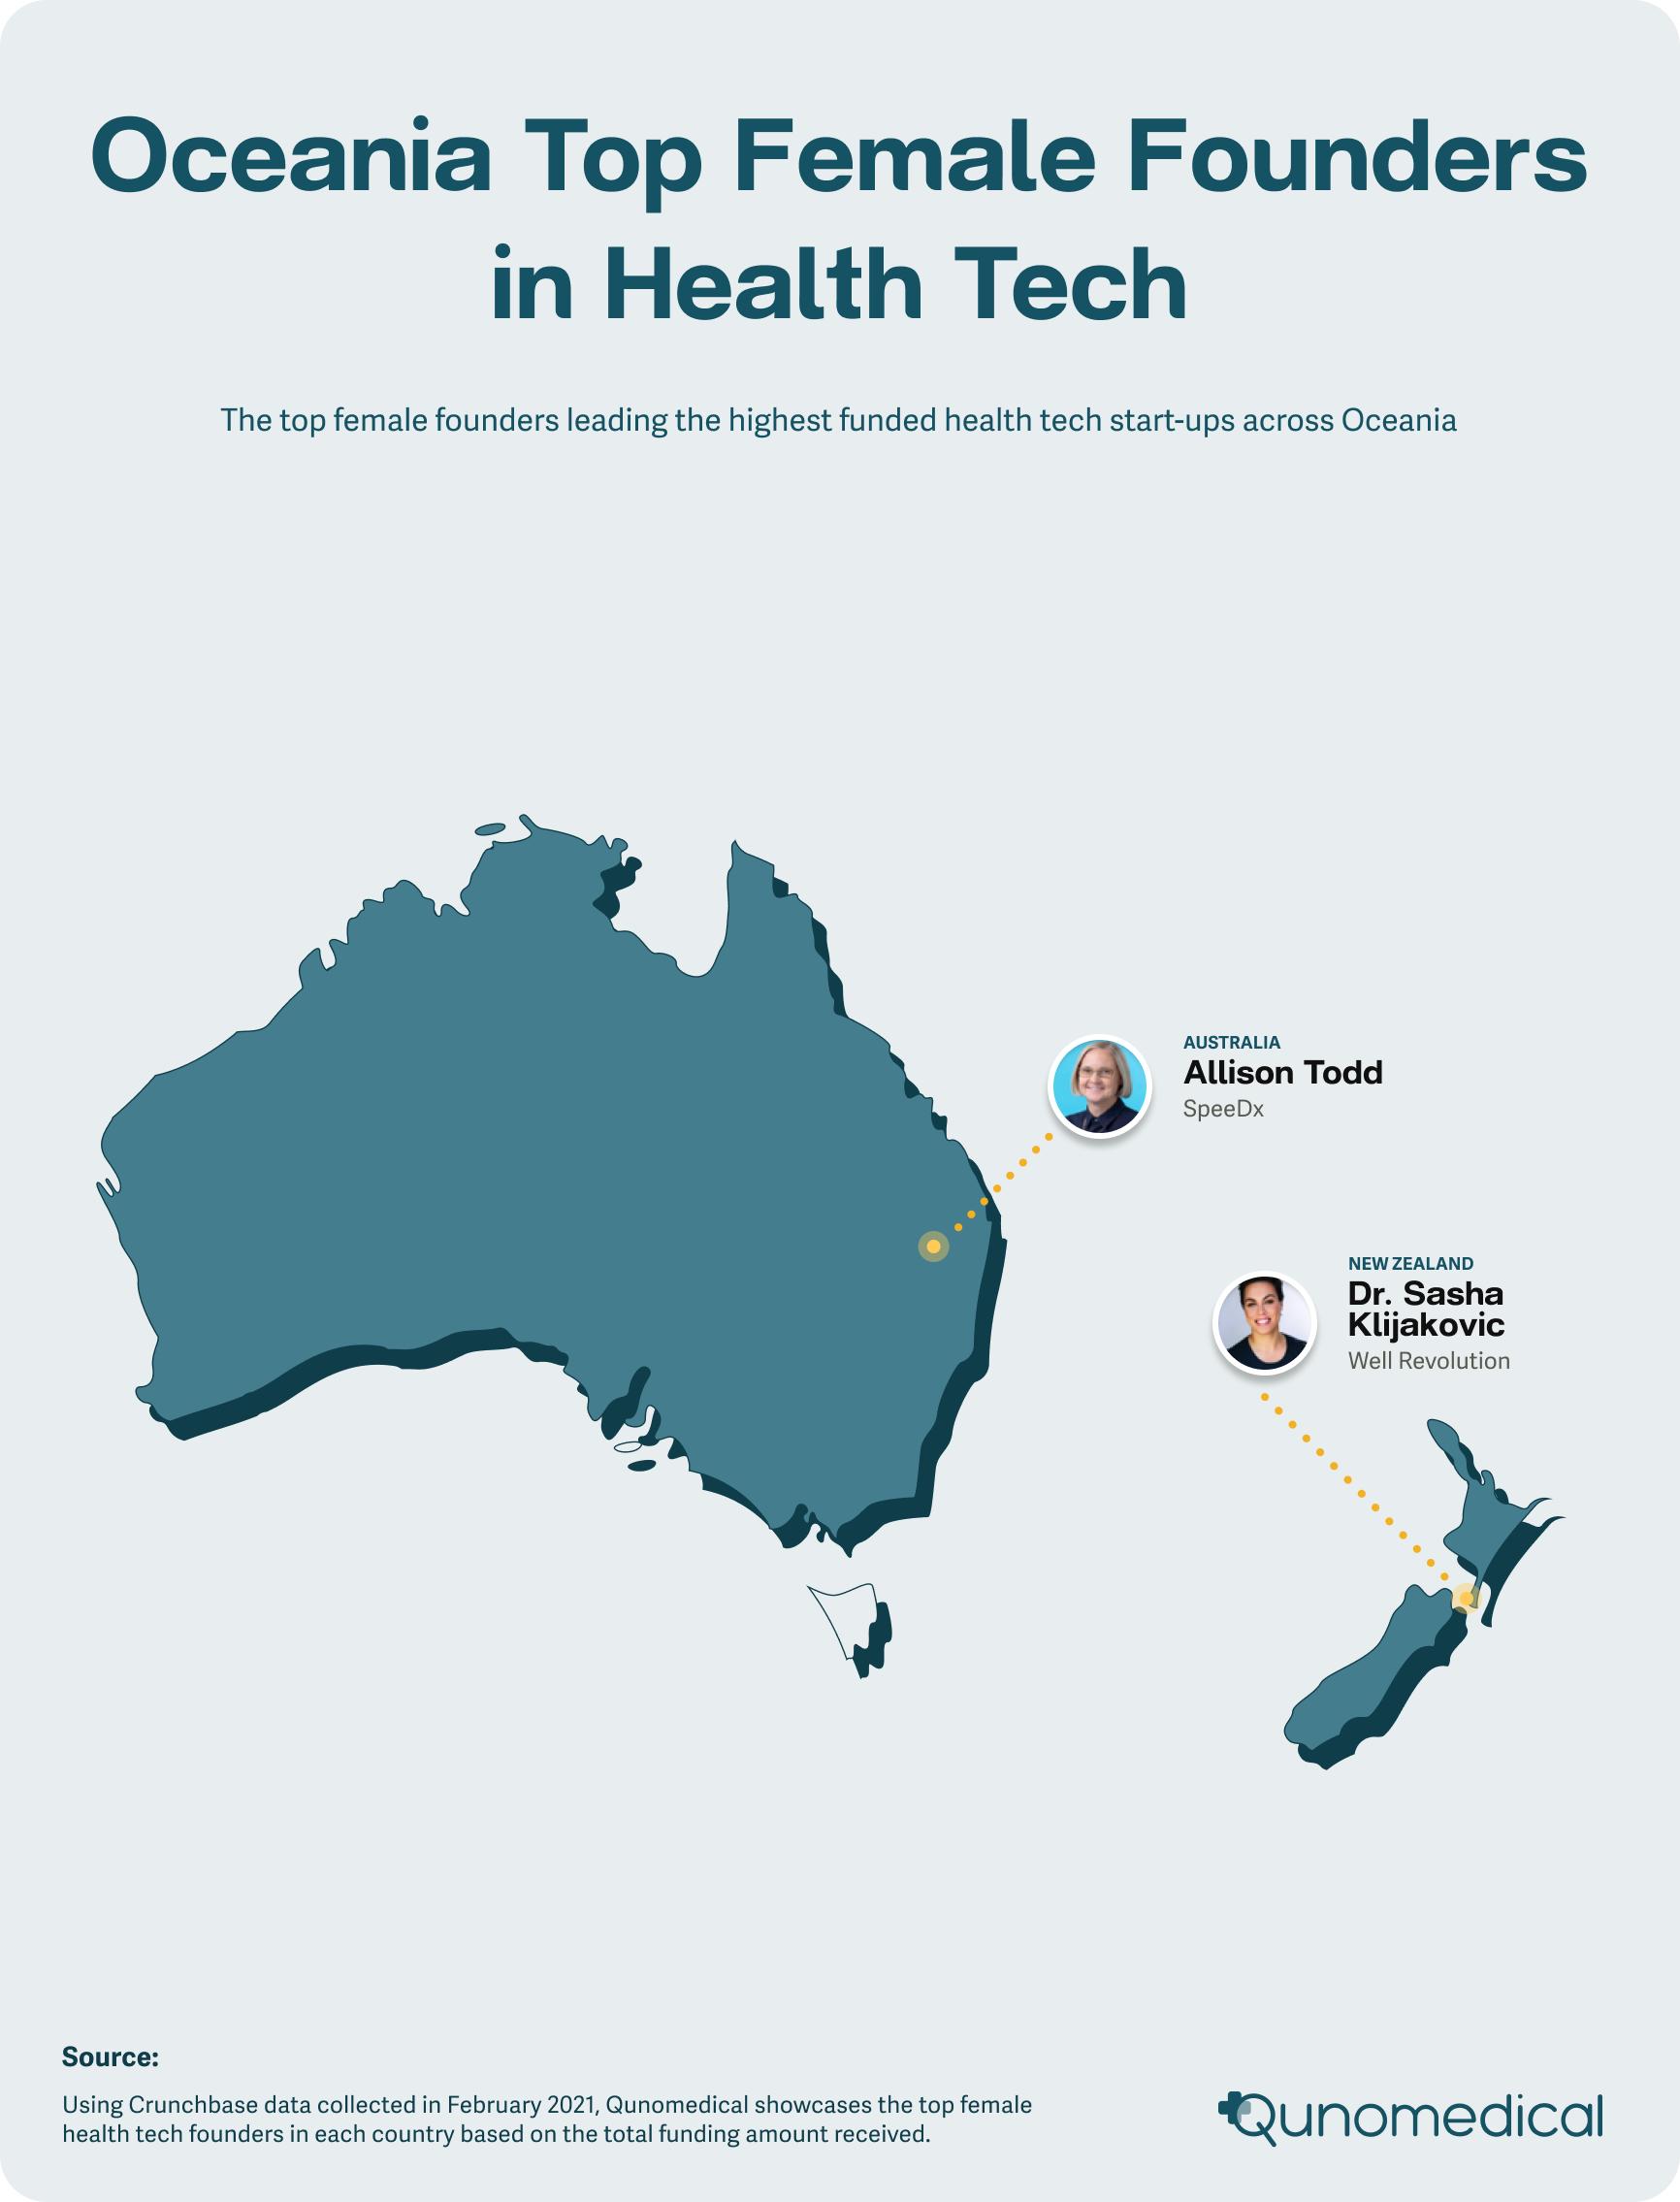 Similar to South America, the health tech start-up scene is gradually building up in Oceania. On average 2015 appears to be the year most were founded.